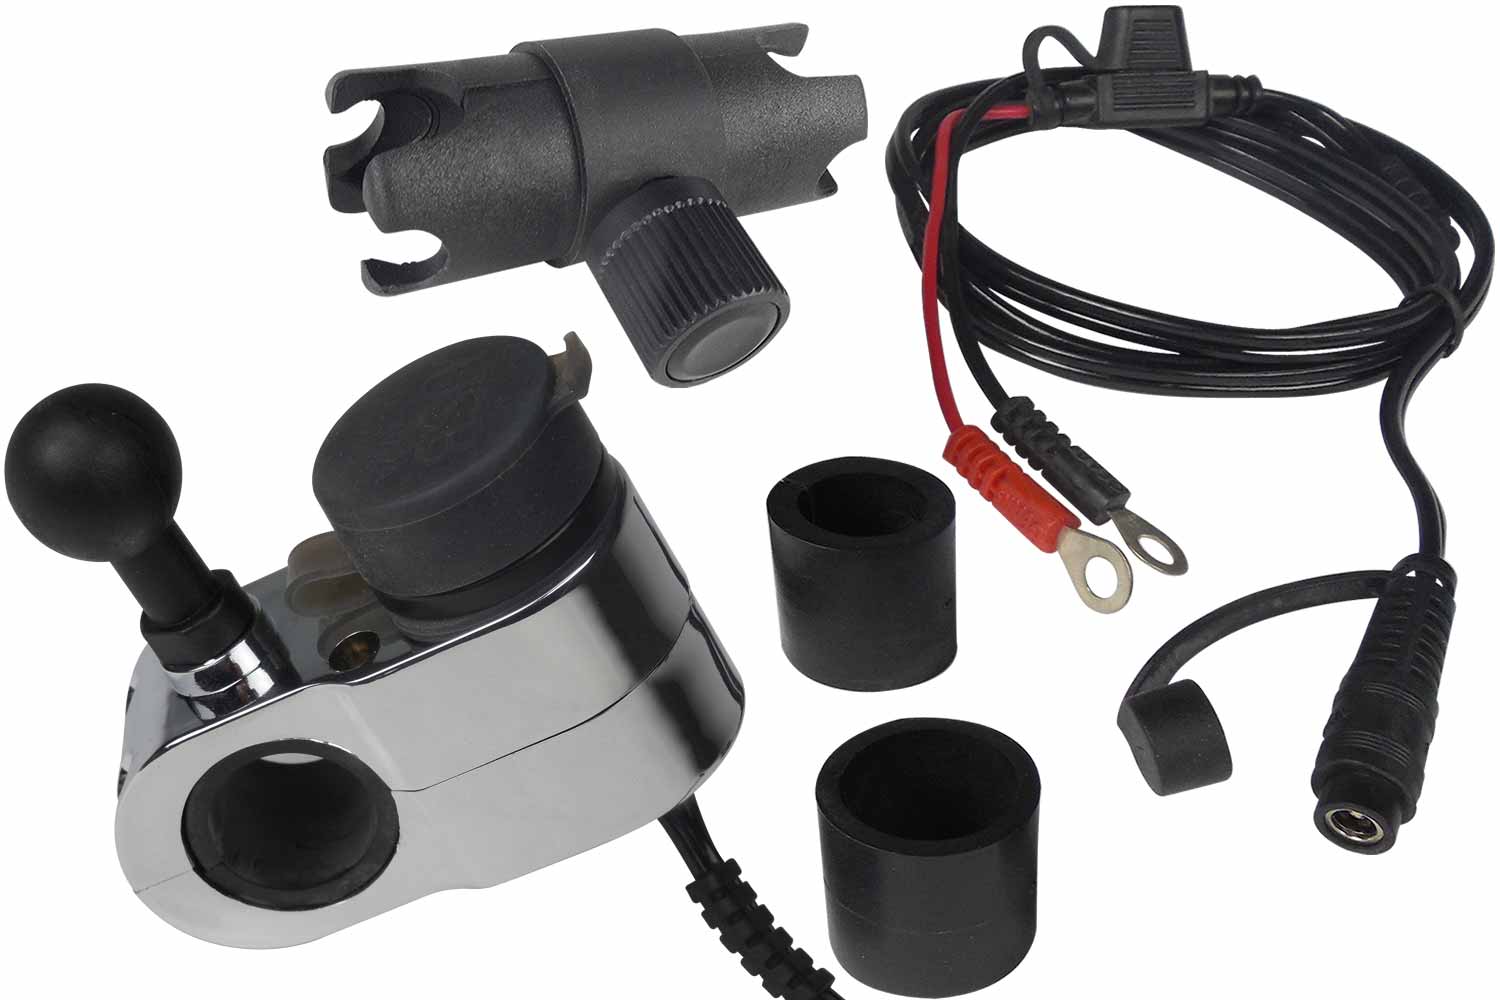 Components of motorcycle mount